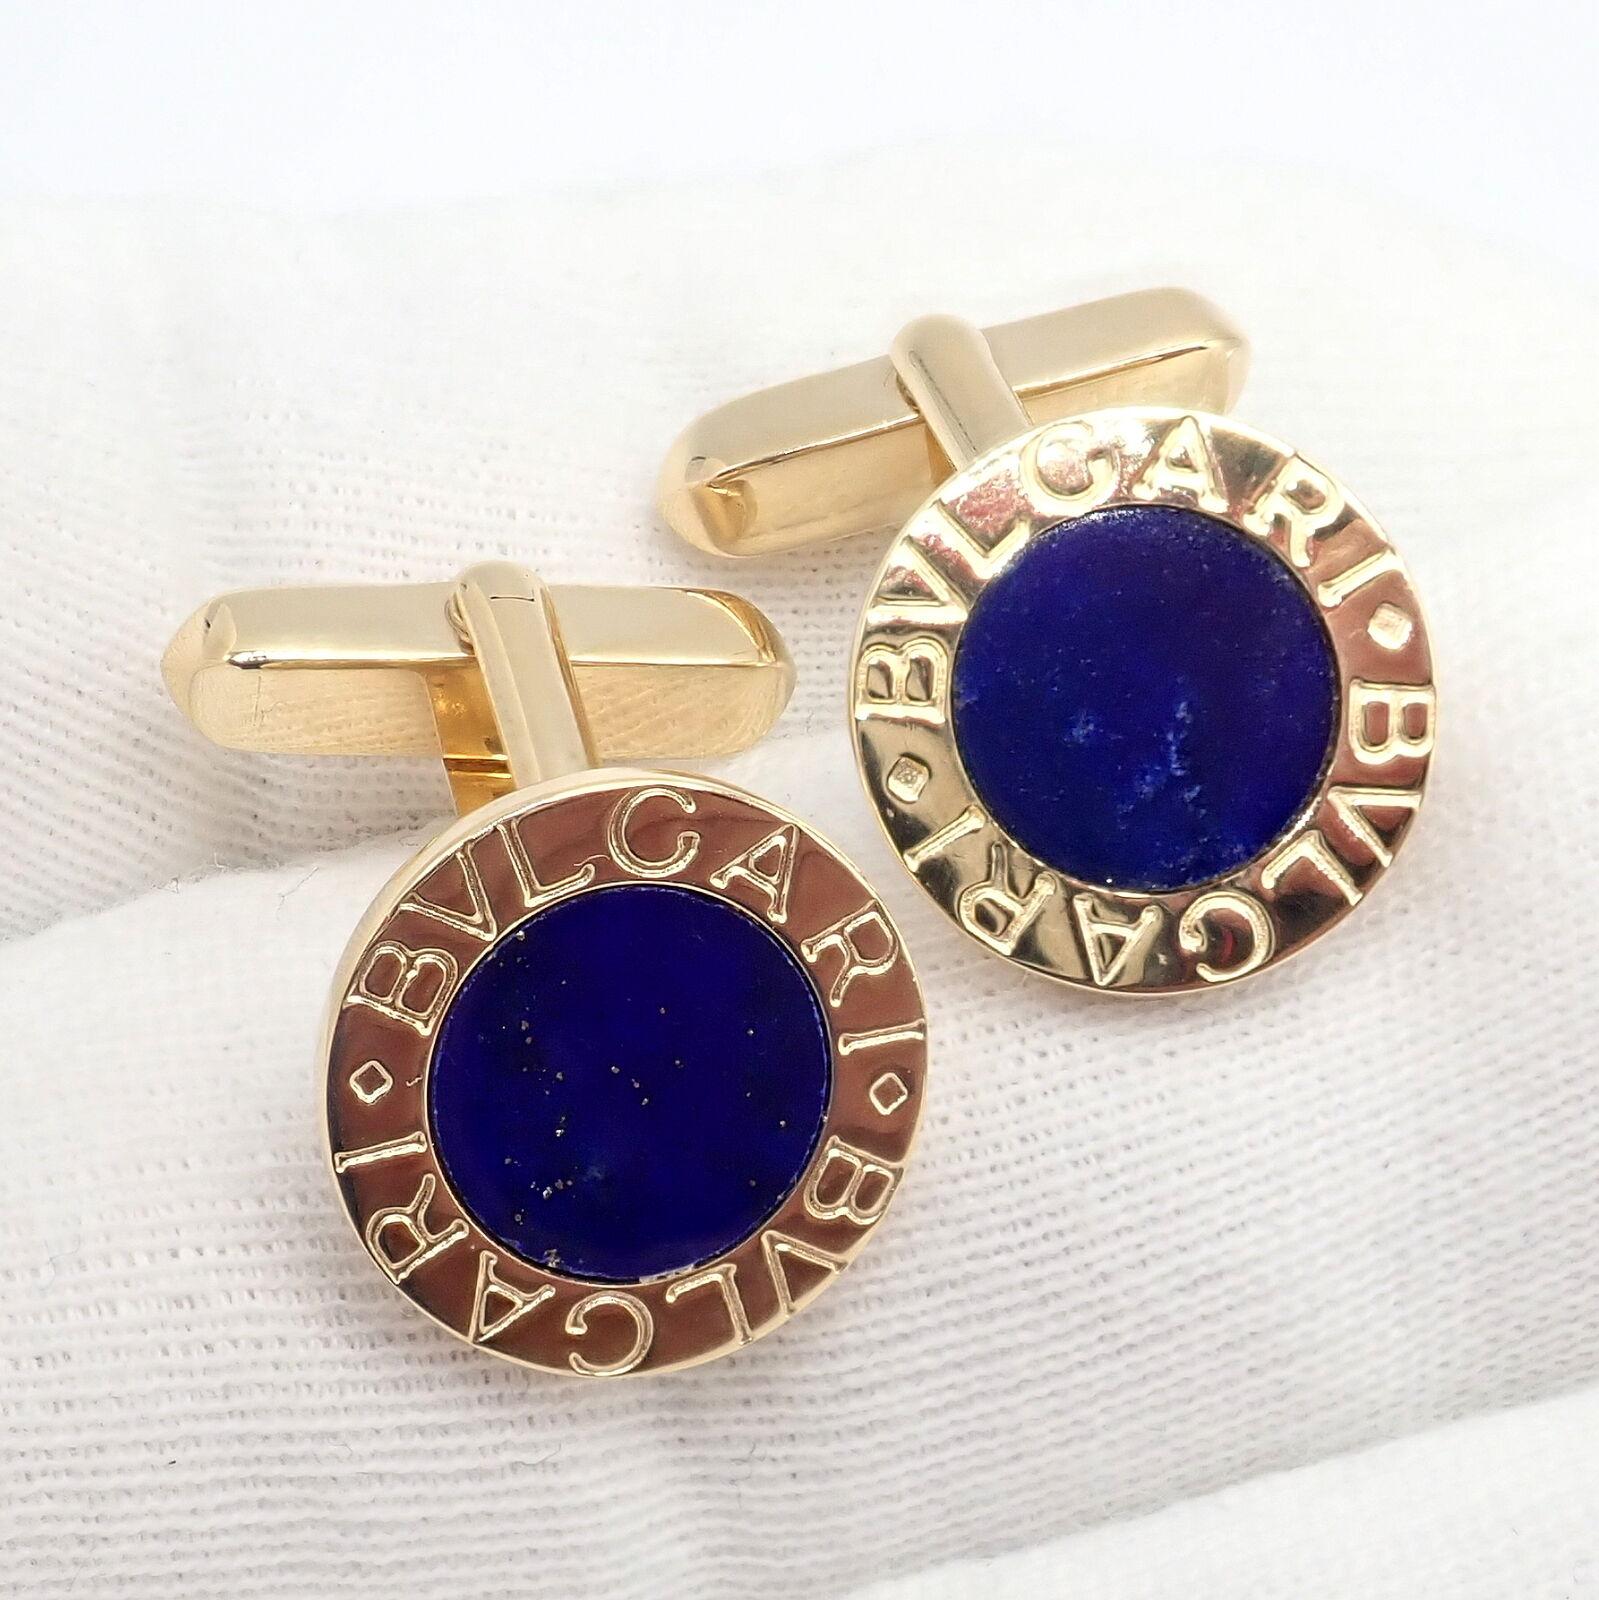 Bulgari Bvlgari Lapis Lazuli Yellow Gold Cufflinks In Excellent Condition For Sale In Holland, PA